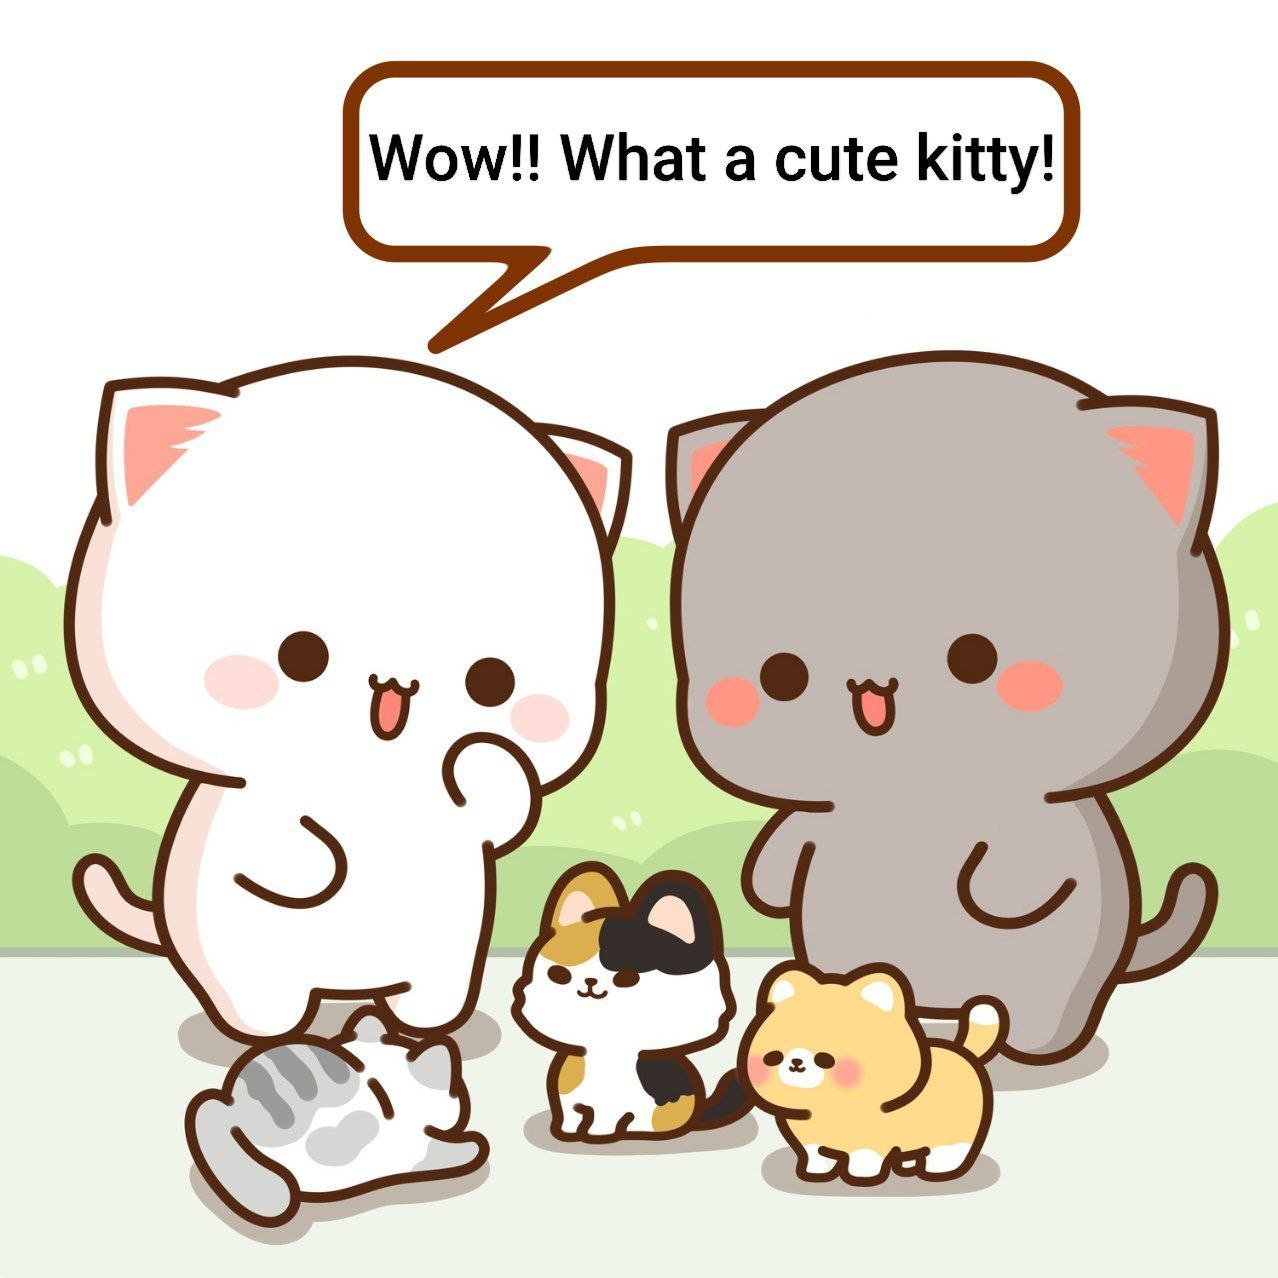 Peach and Goma with cute kittens